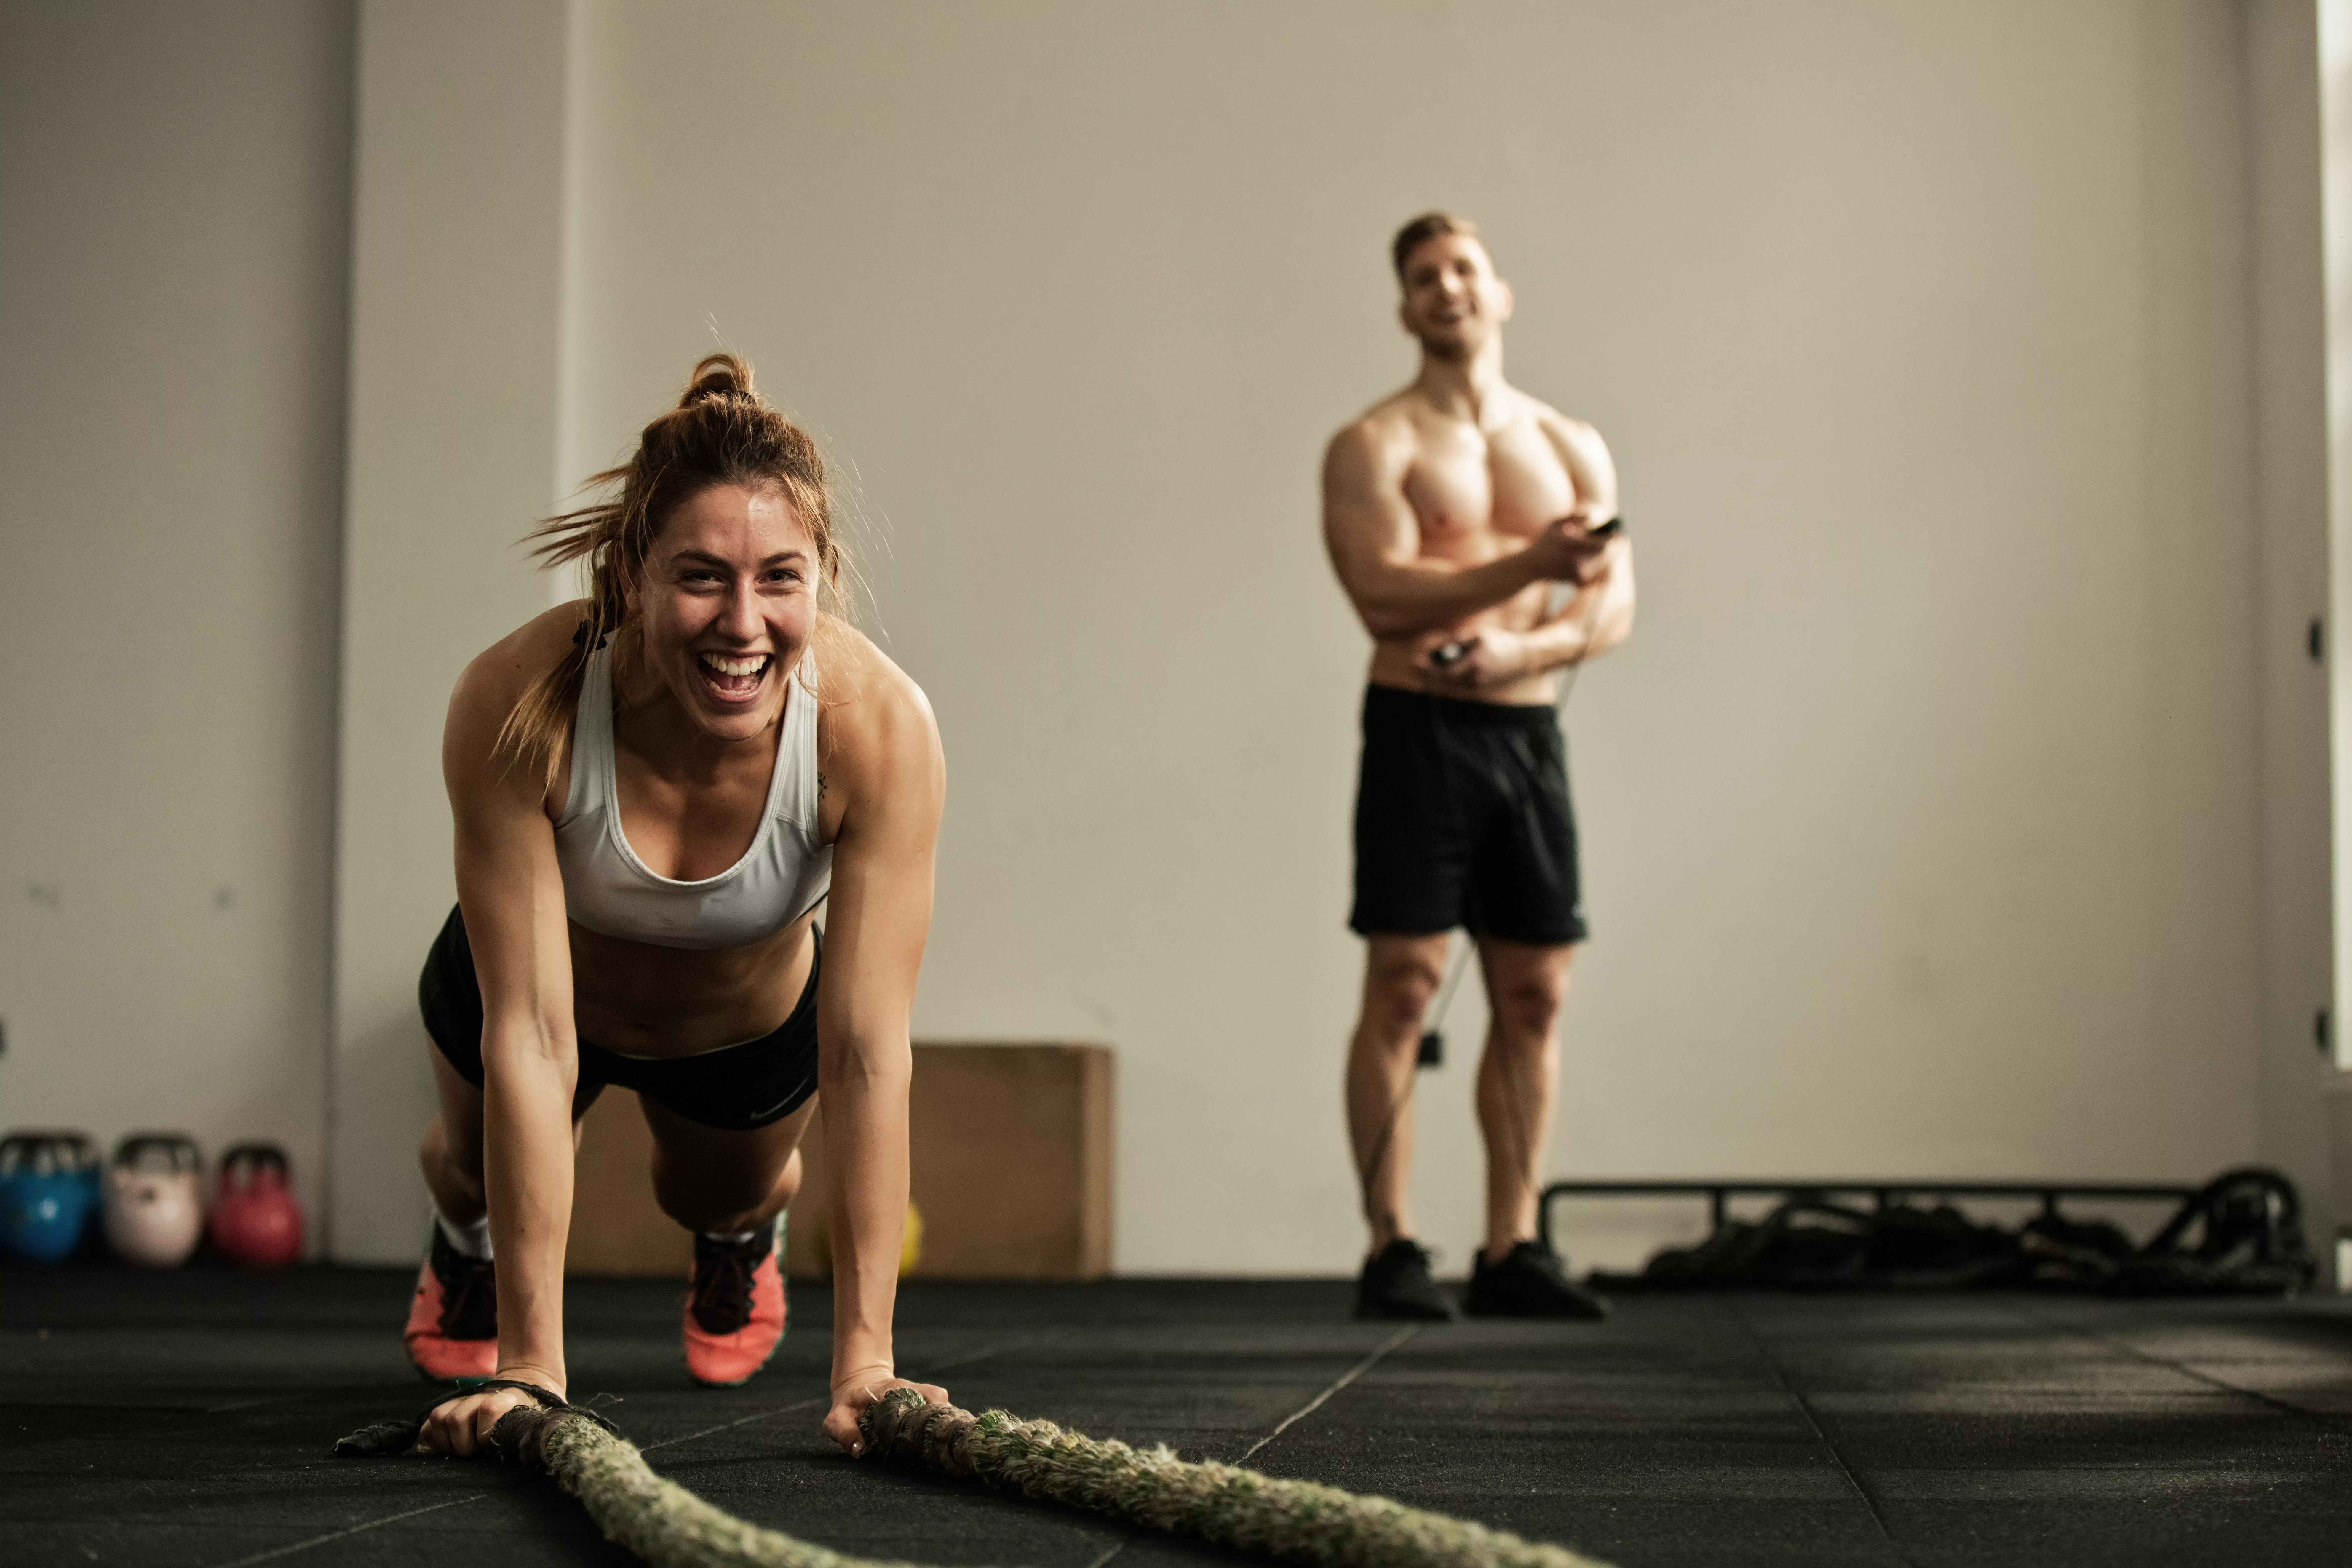 Cheerful female athlete doing push-ups while exercising with battle rope and having fun in a gym.